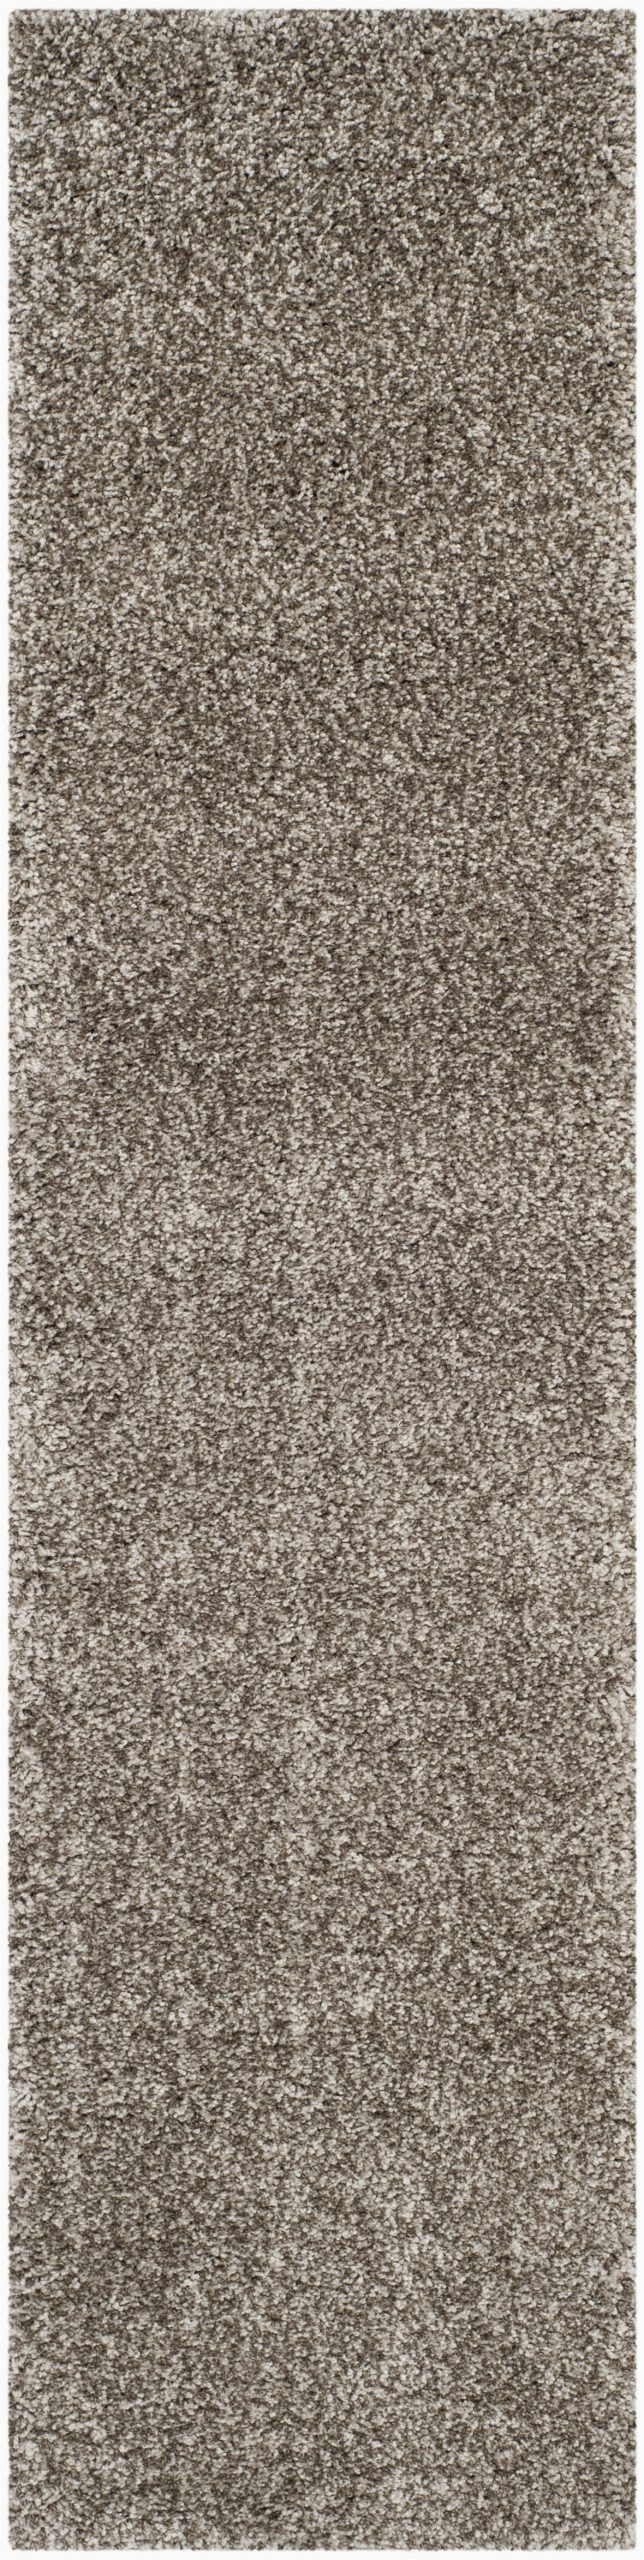 Starr Hill Ivory area Rug Starr Hill Ivory Gray area Rug